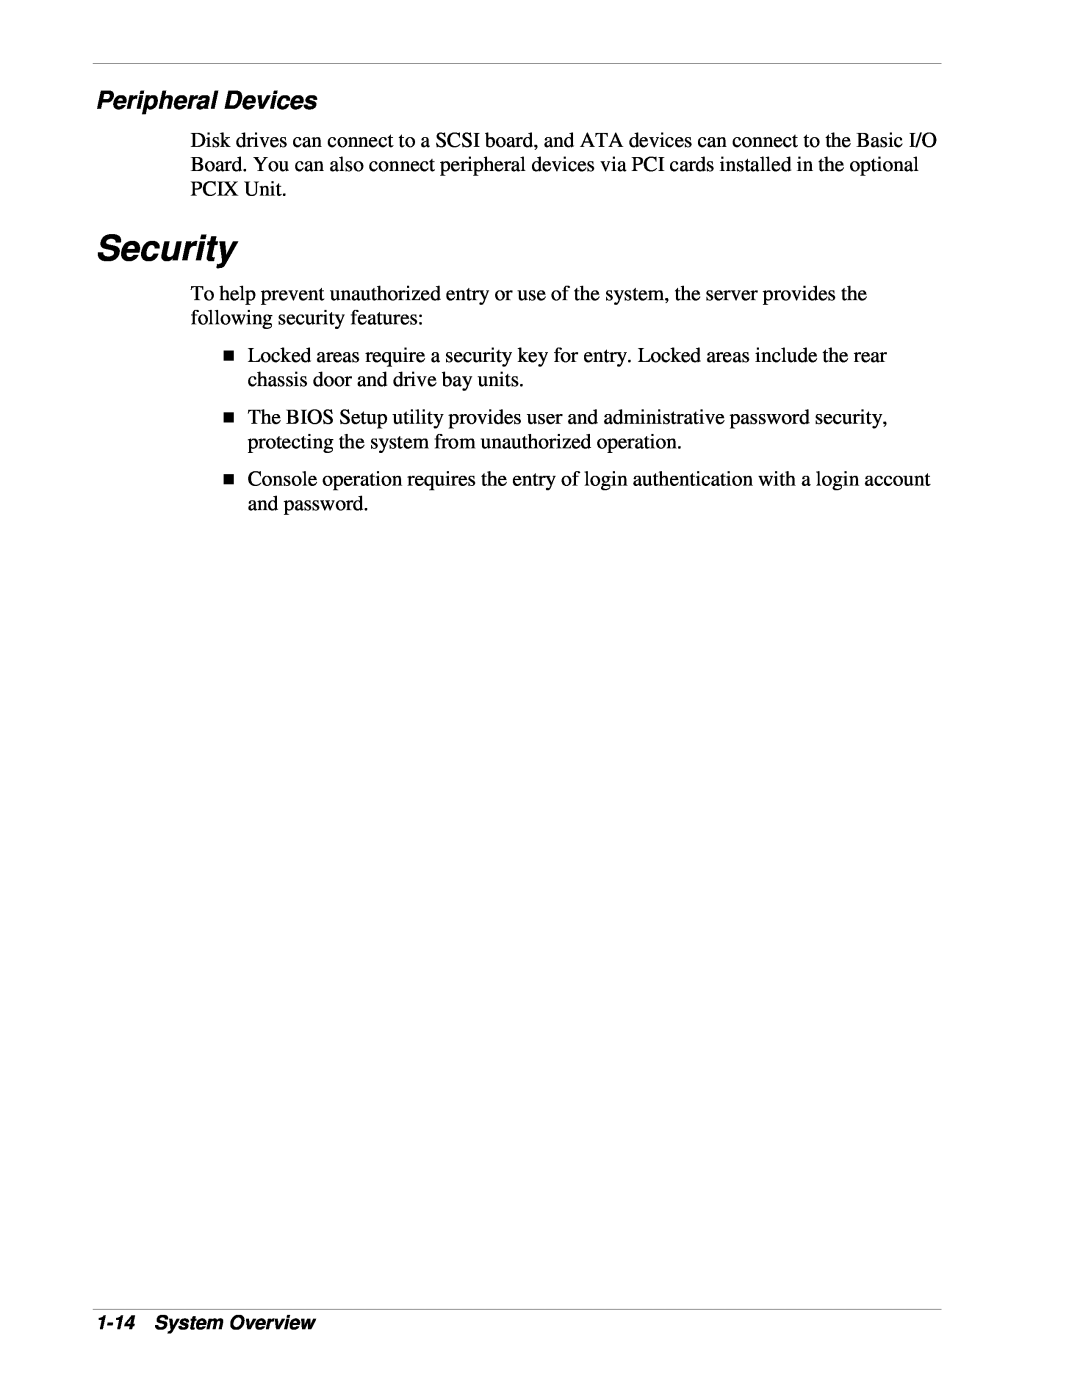 NEC 1080Xd manual Security, Peripheral Devices 